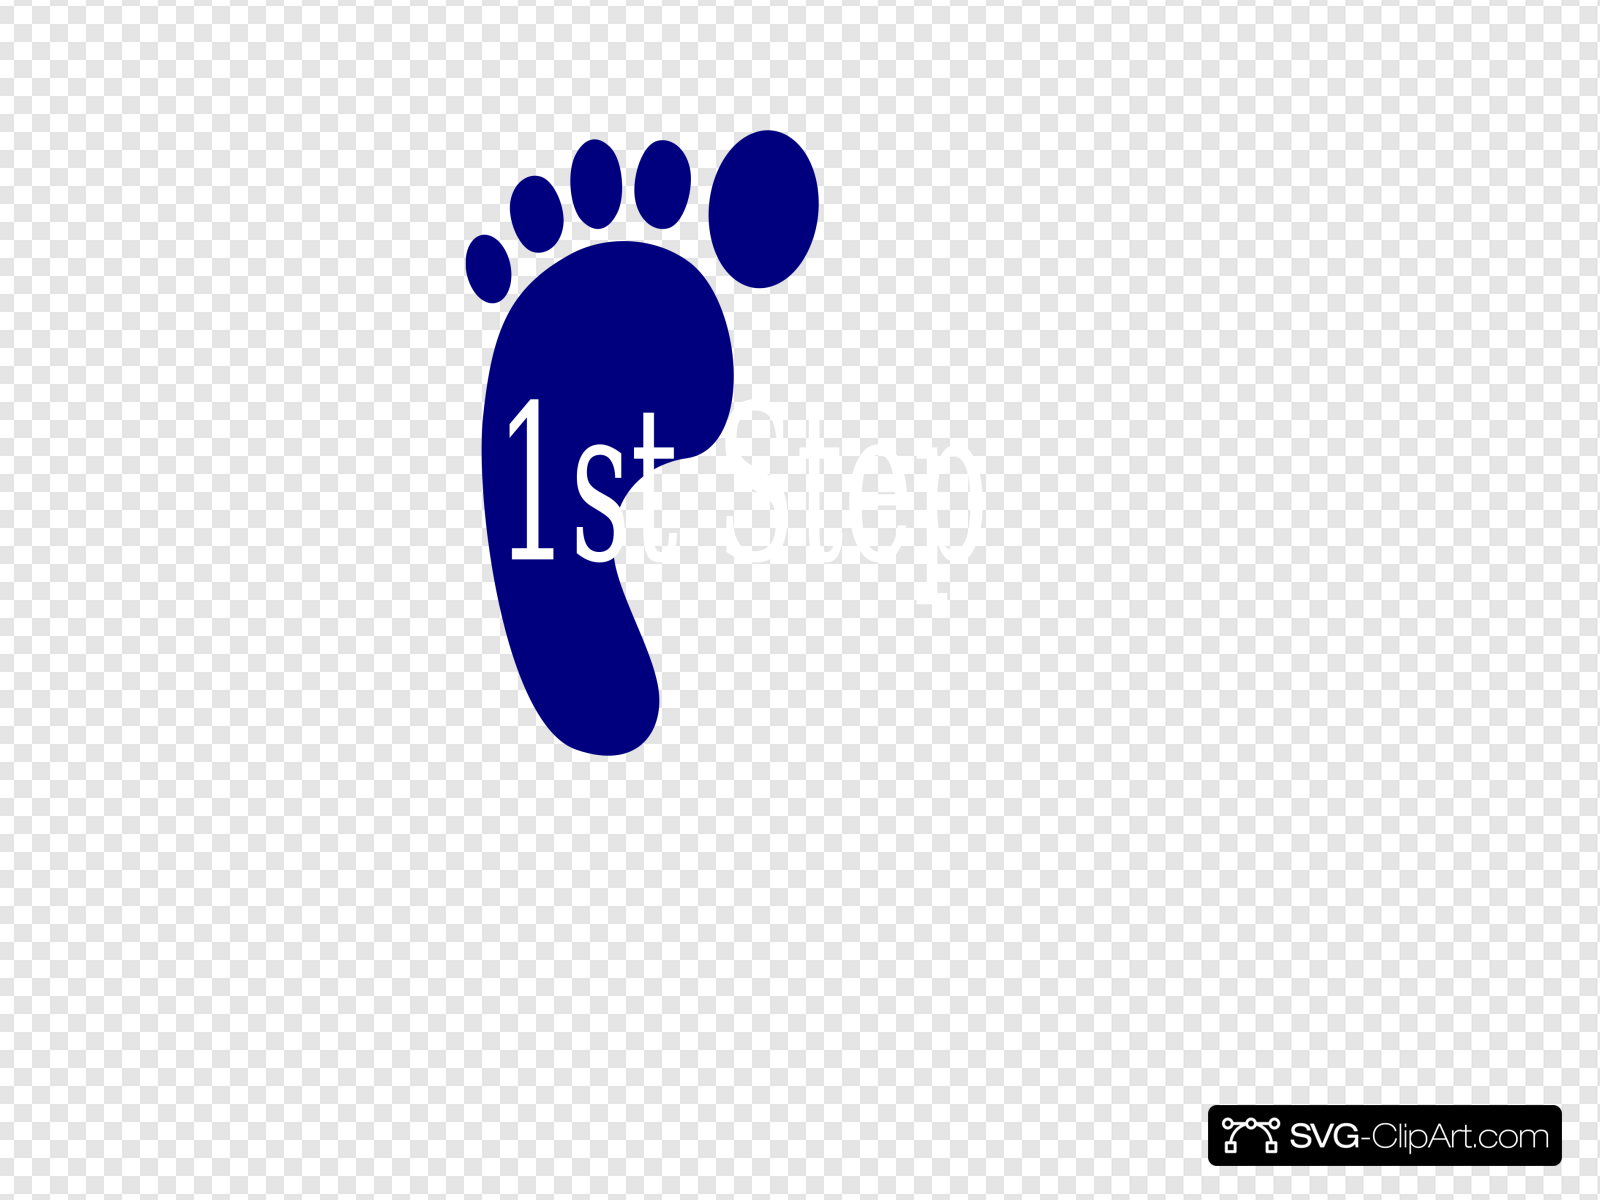 First Step Clip art, Icon and SVG.